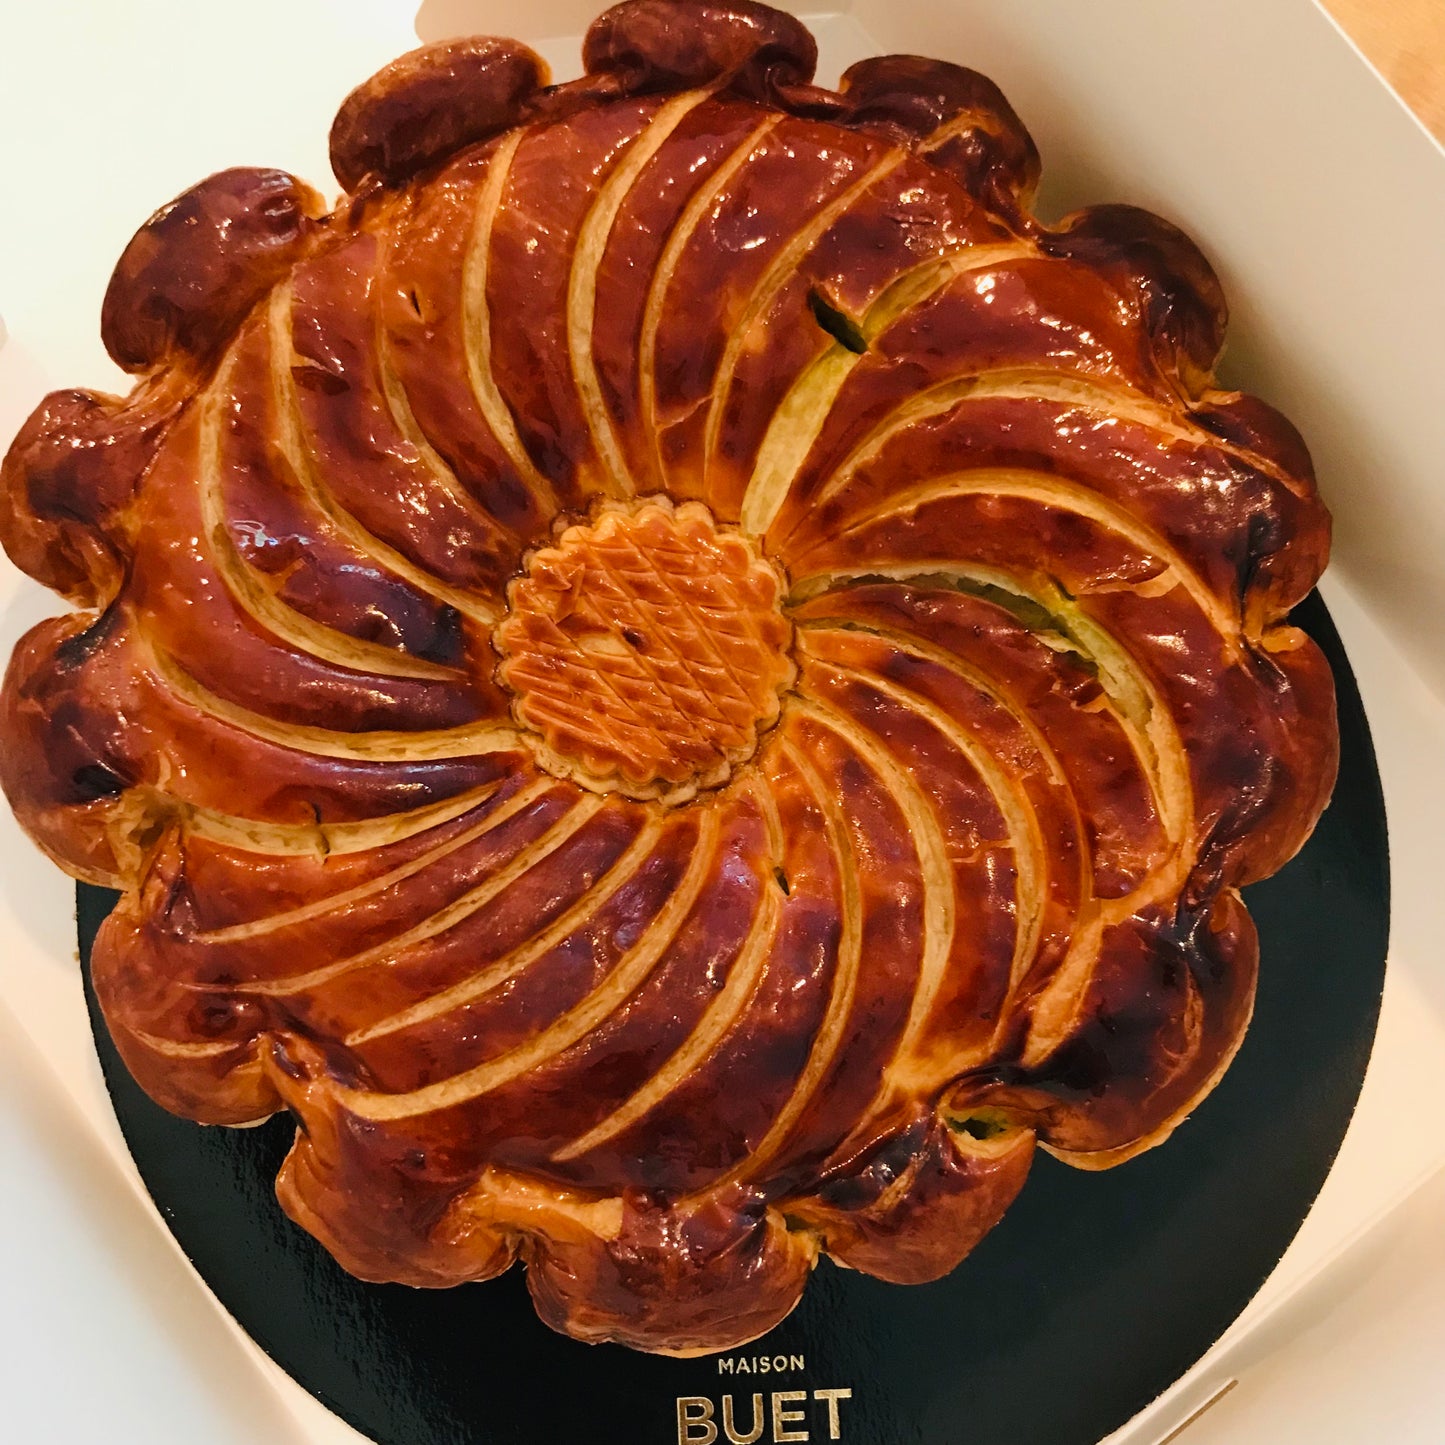 Galette des rois with matcha only to be collected at the salon 6/1 - 22/1/2022